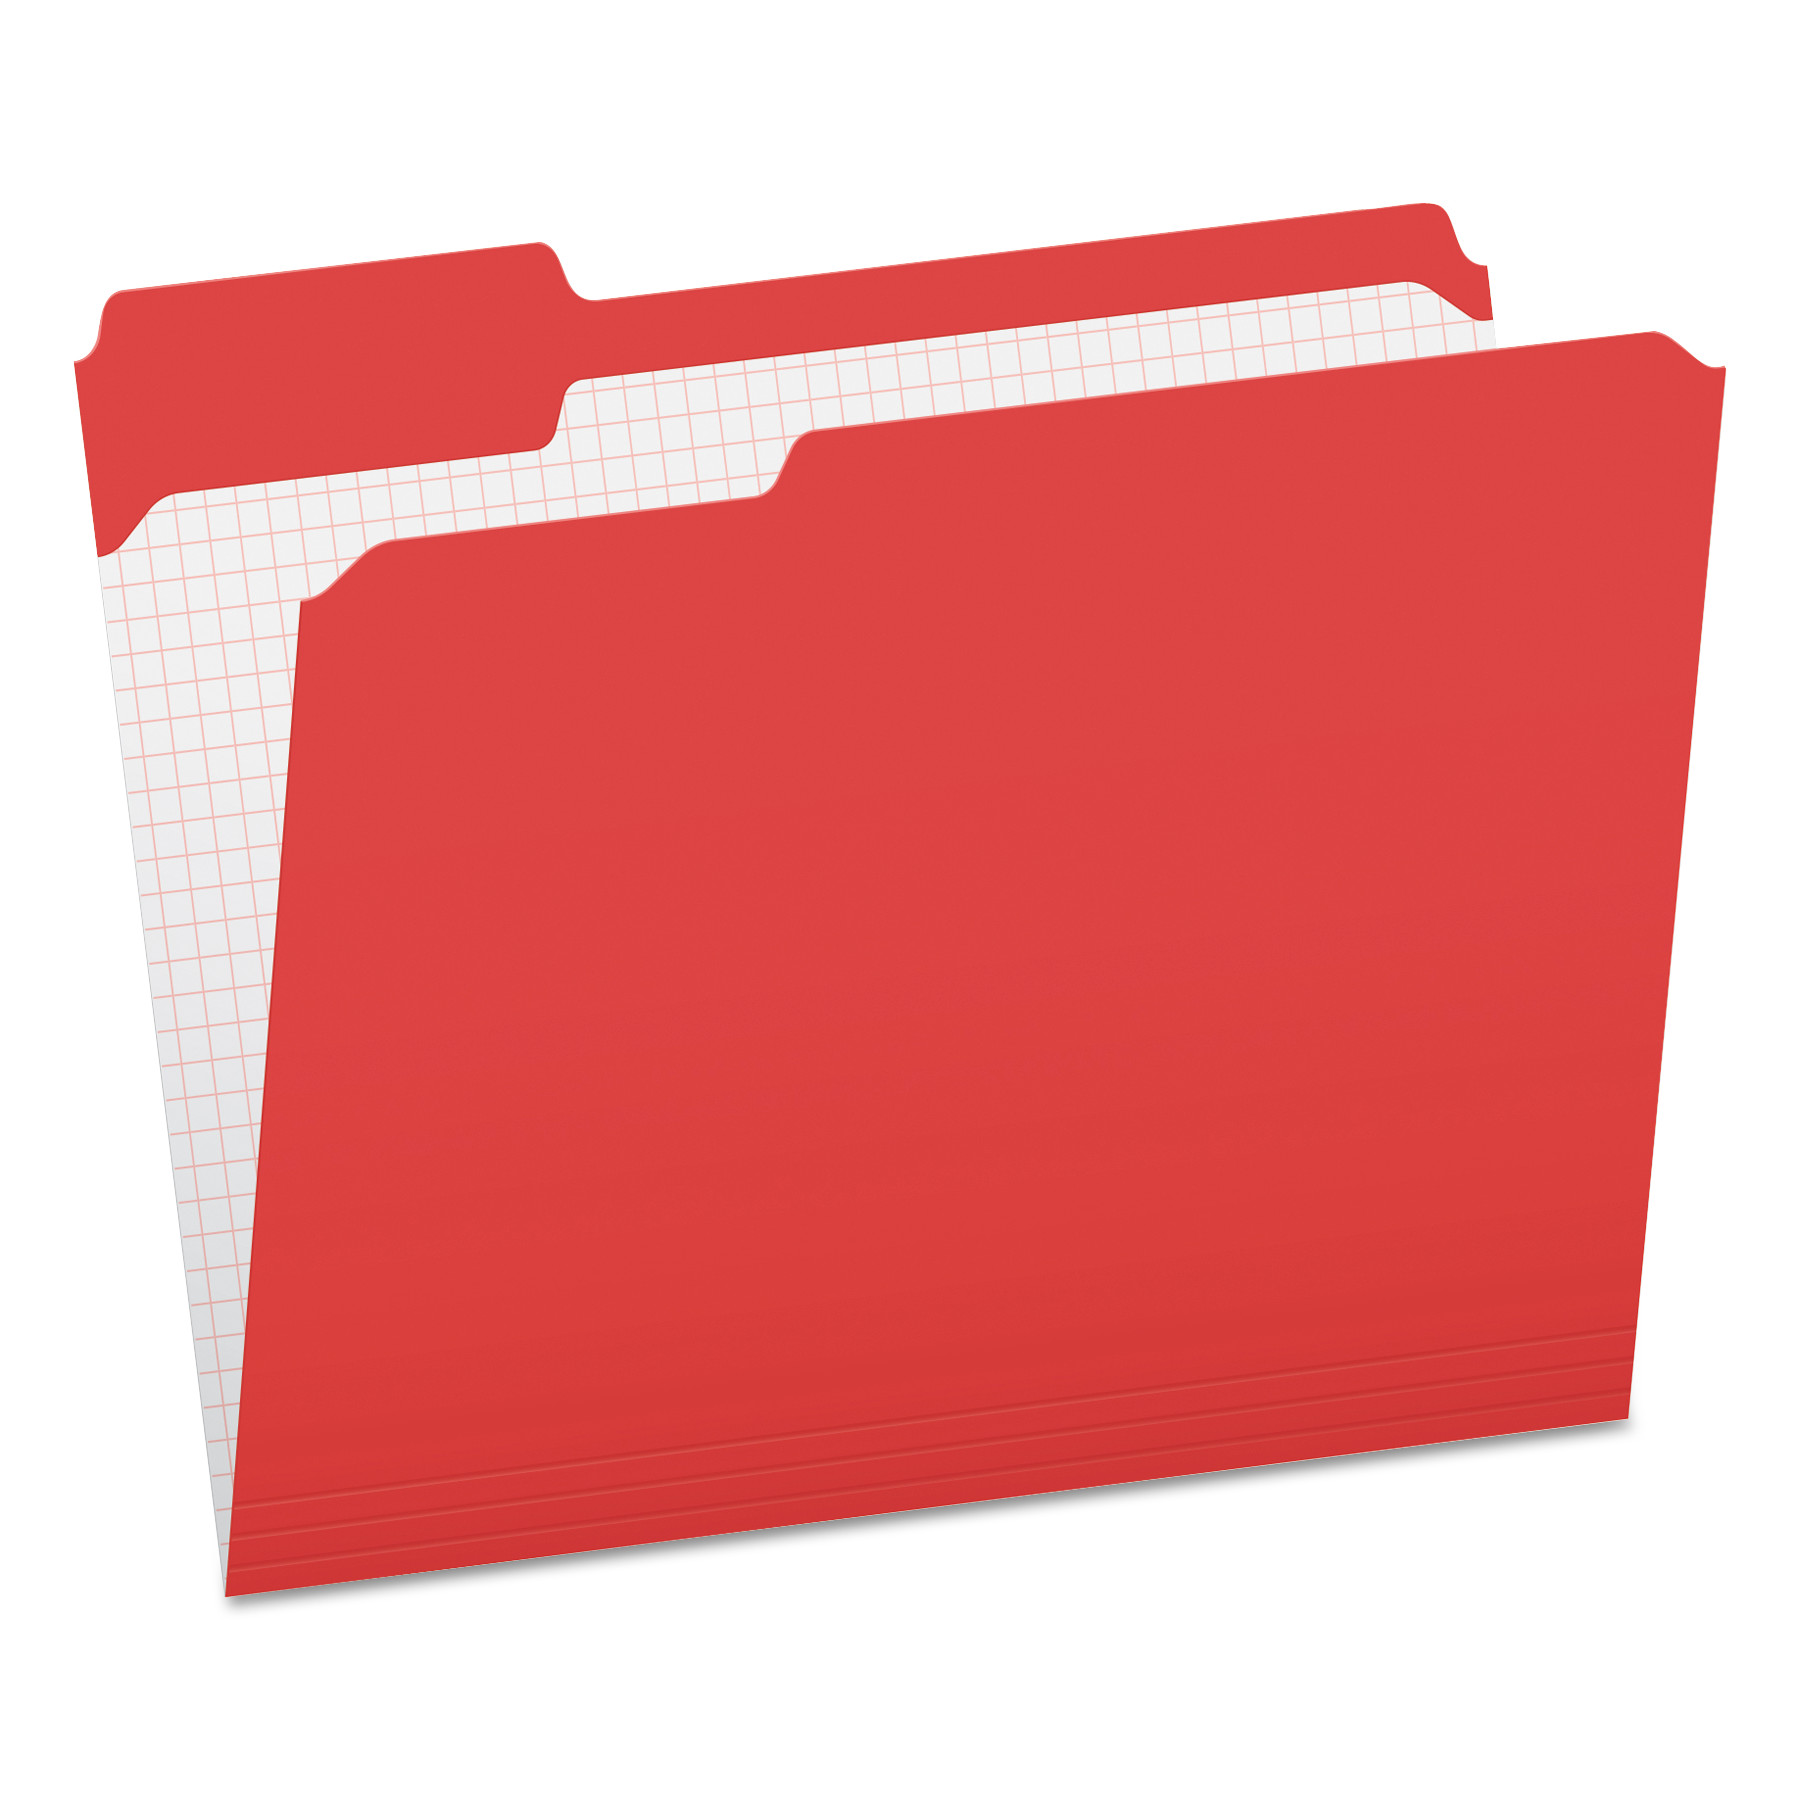  Pendaflex R152 1/3 RED Double-Ply Reinforced Top Tab Colored File Folders, 1/3-Cut Tabs, Letter Size, Red, 100/Box (PFXR15213RED) 